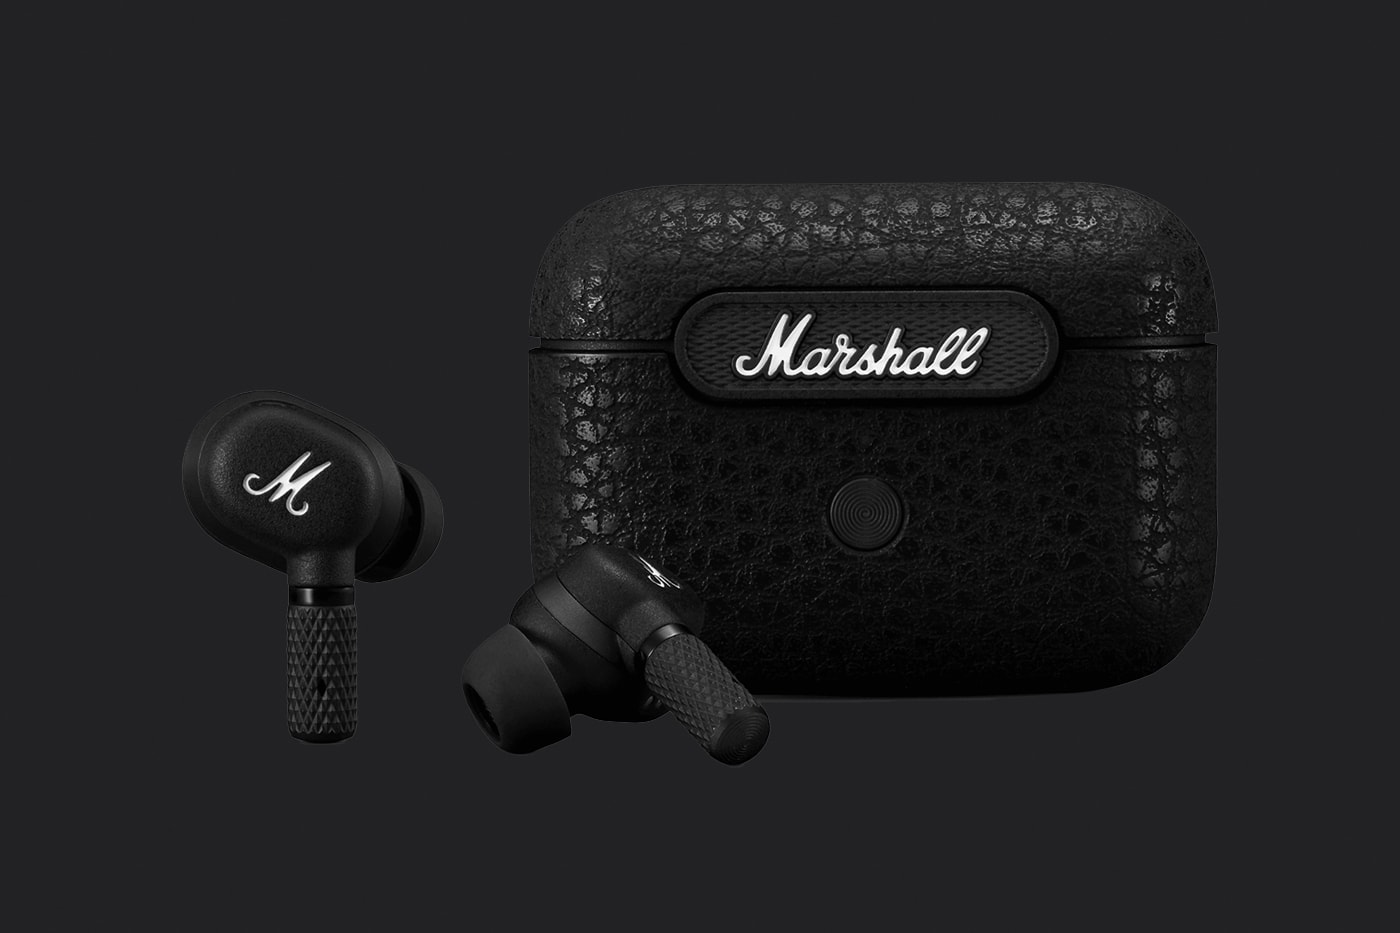 Marshall Releases Its First ANC Wireless Earbuds active noise cancelling equalizer EQ mode touch response sensistive all black leather scratch proof water resistant release info